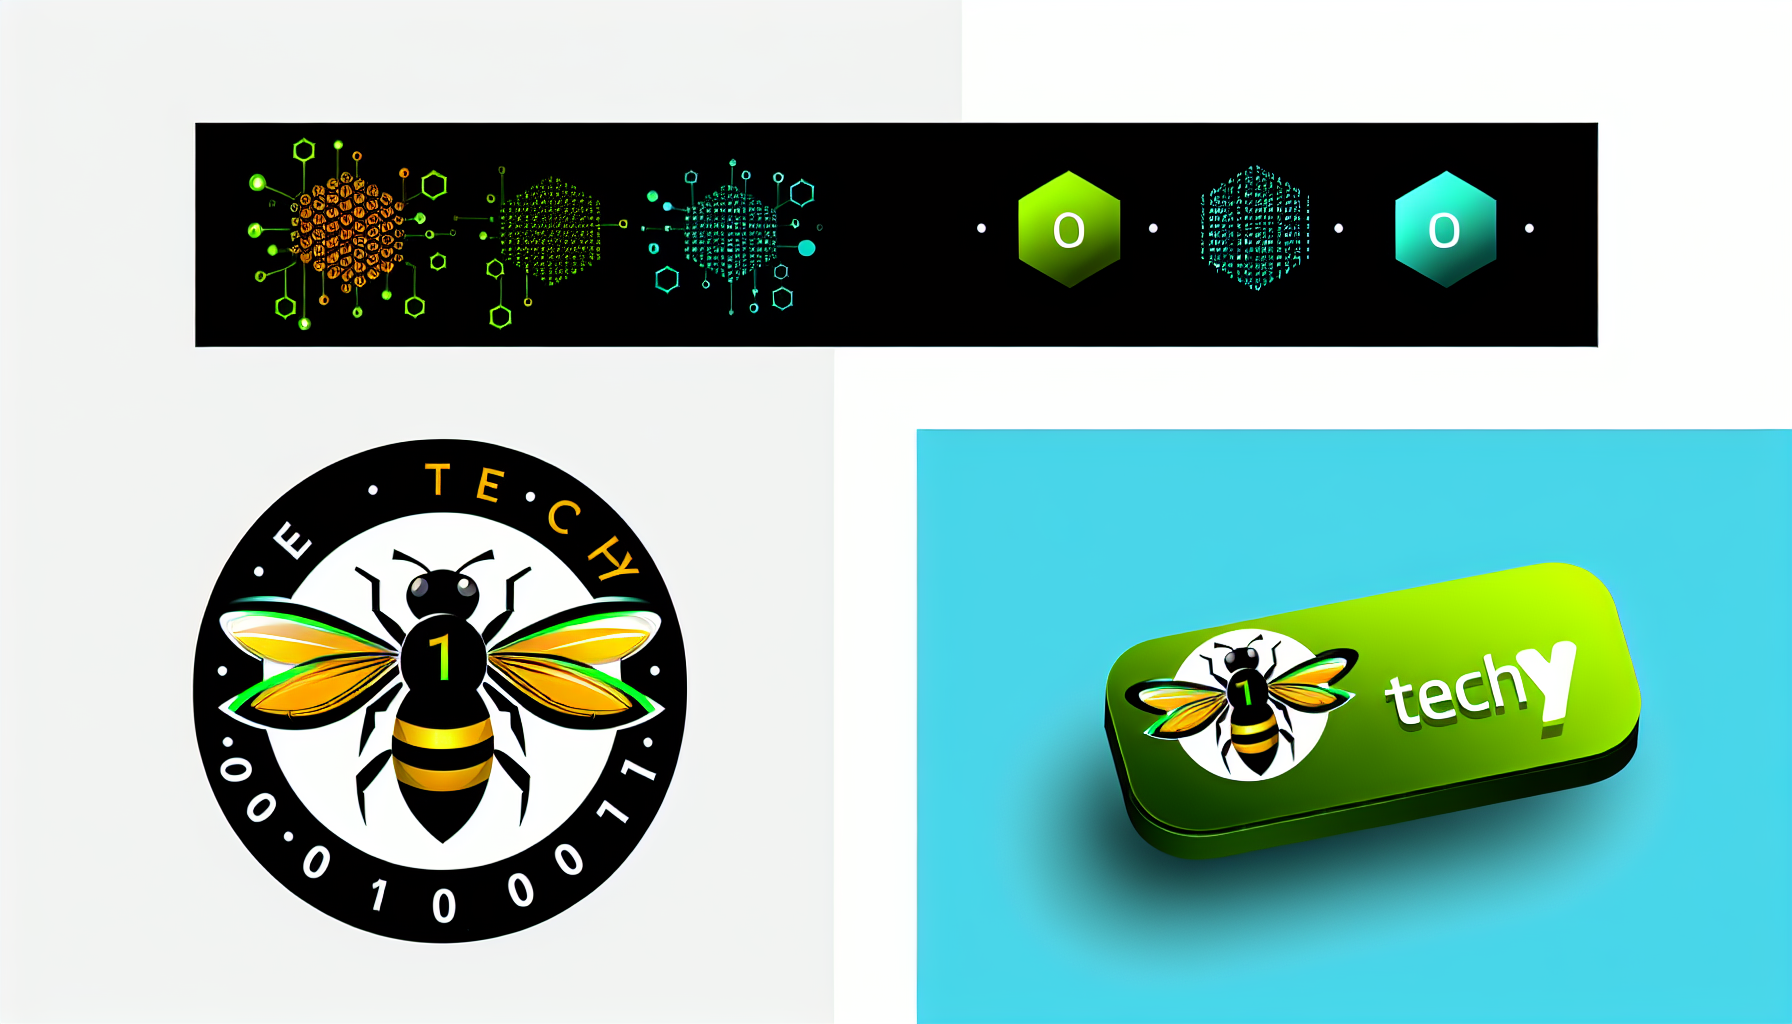 Bee Techy logo with a call-to-action button